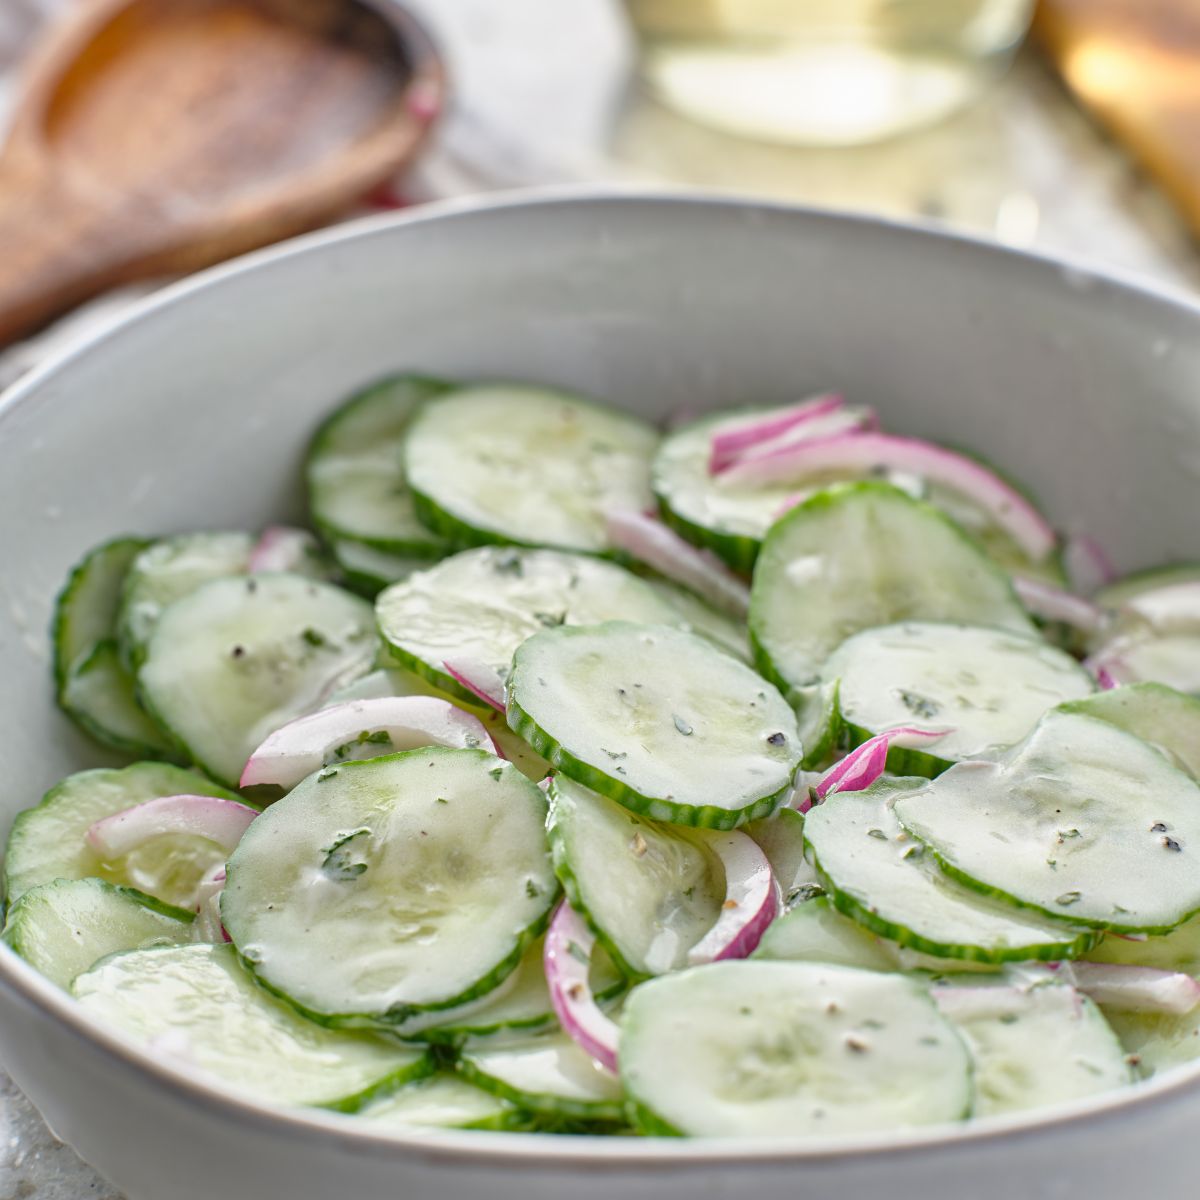 Creamy Cucumber Salad With Ranch Dressing